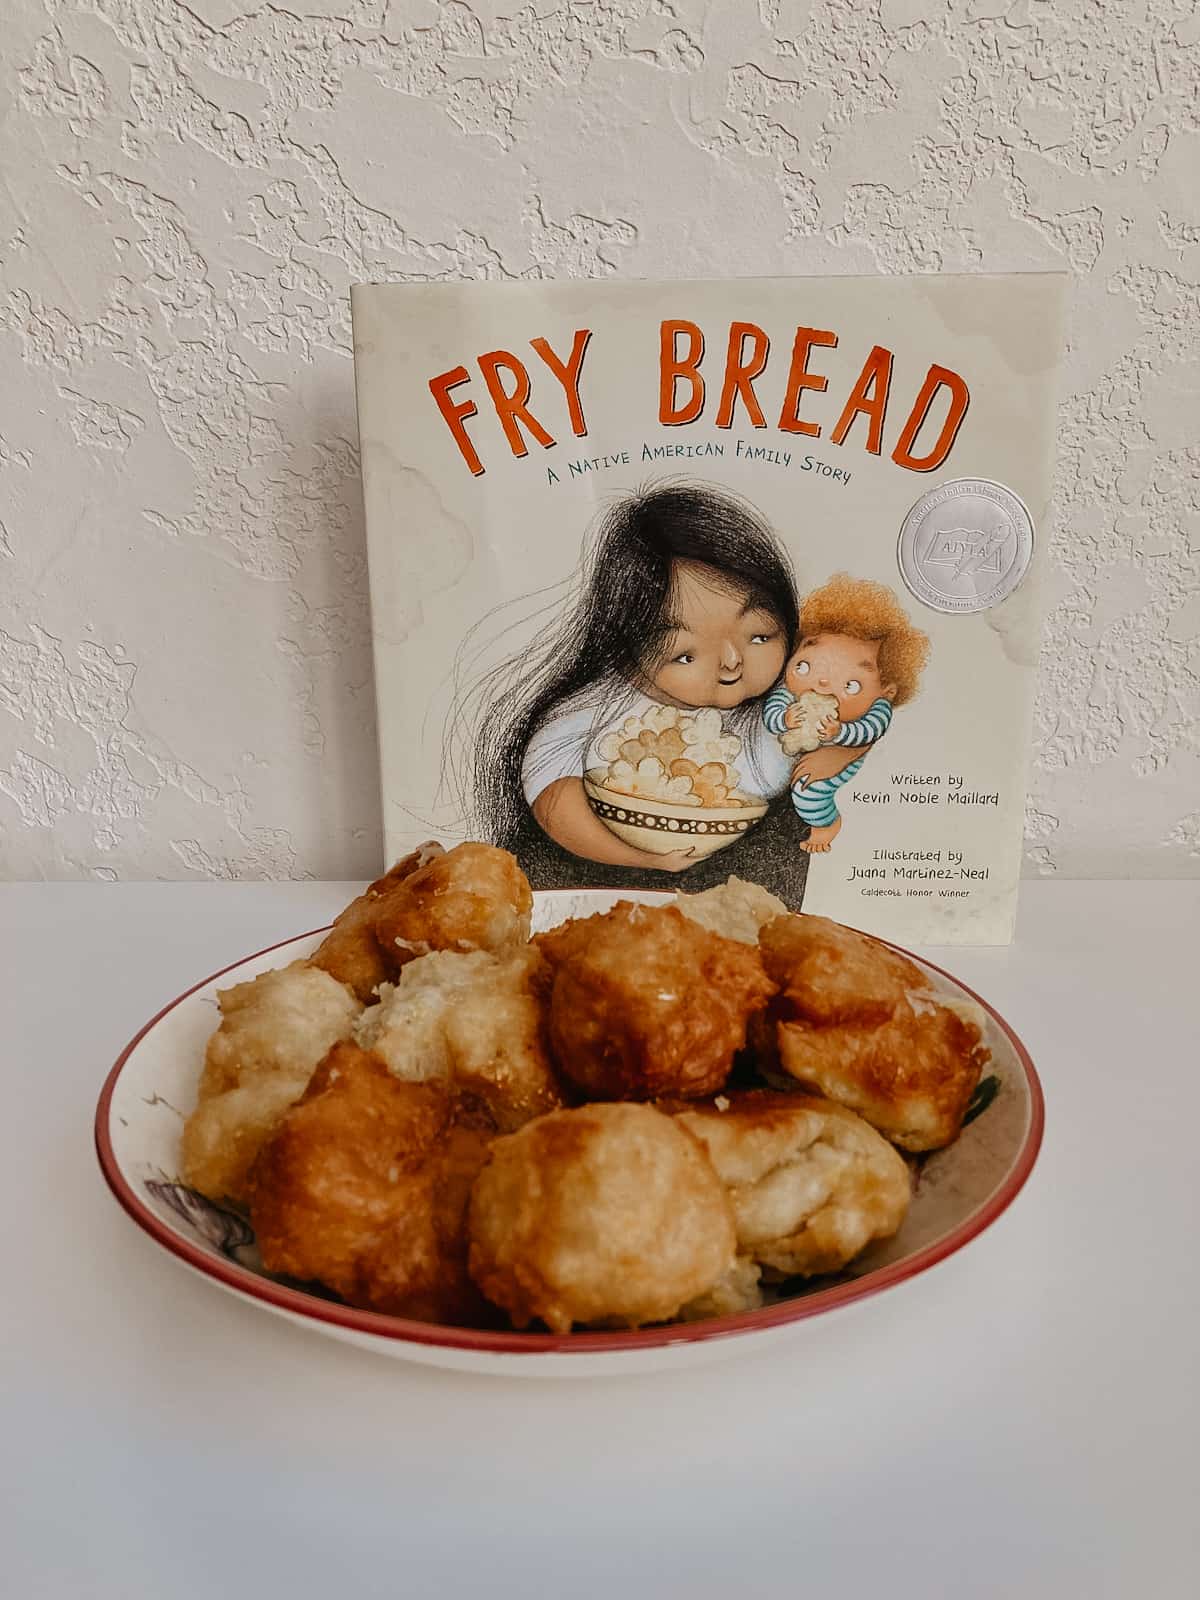 Fry Bread book and bowl of fry bread on table